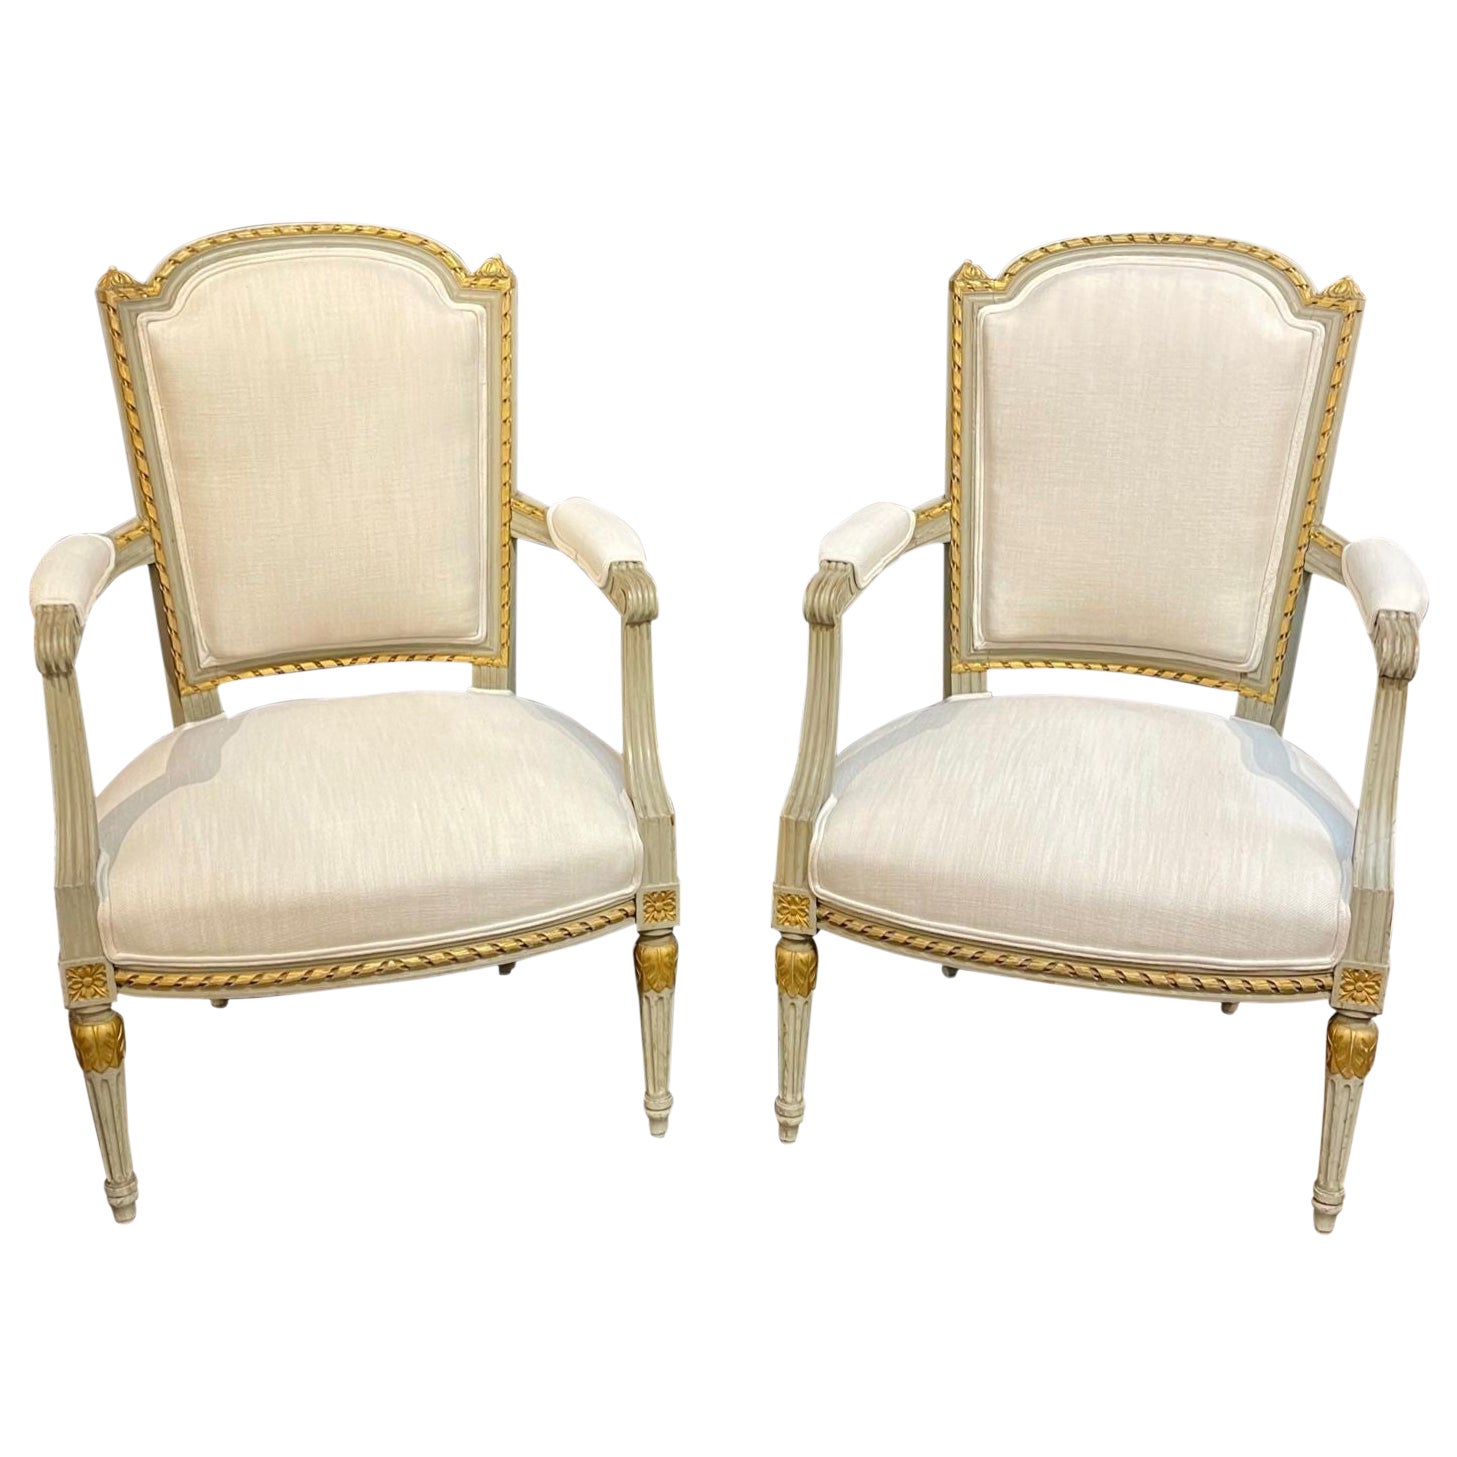 19th Century French Louis XVI Carved and Painted Chairs For Sale